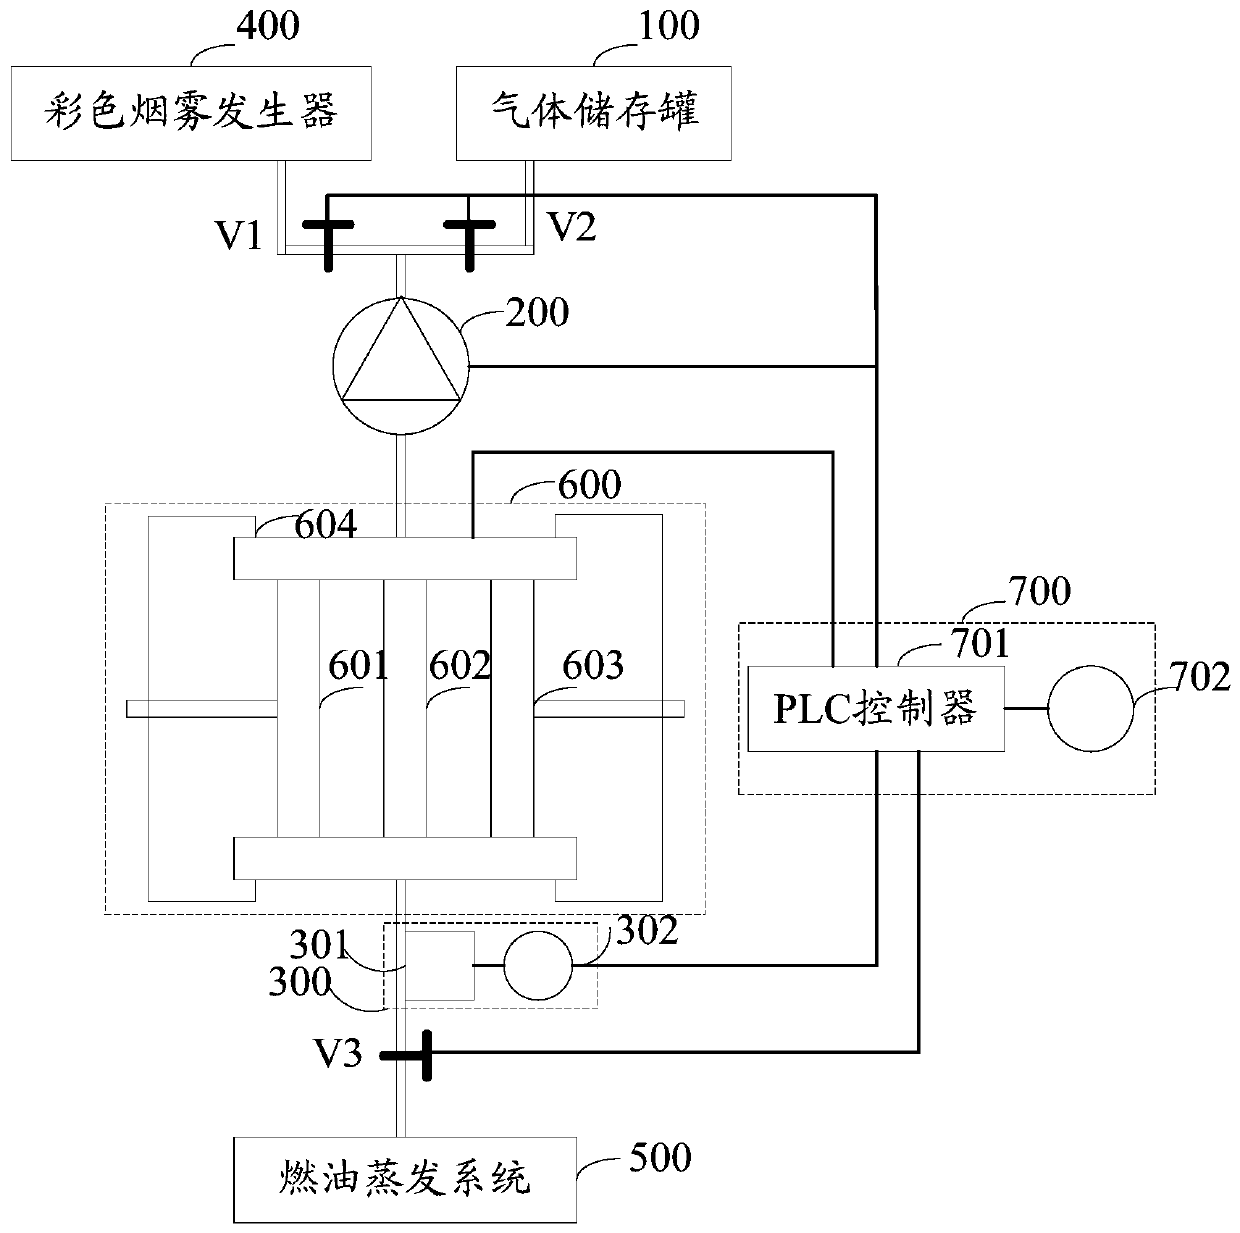 Leakage detection device of fuel oil evaporation system